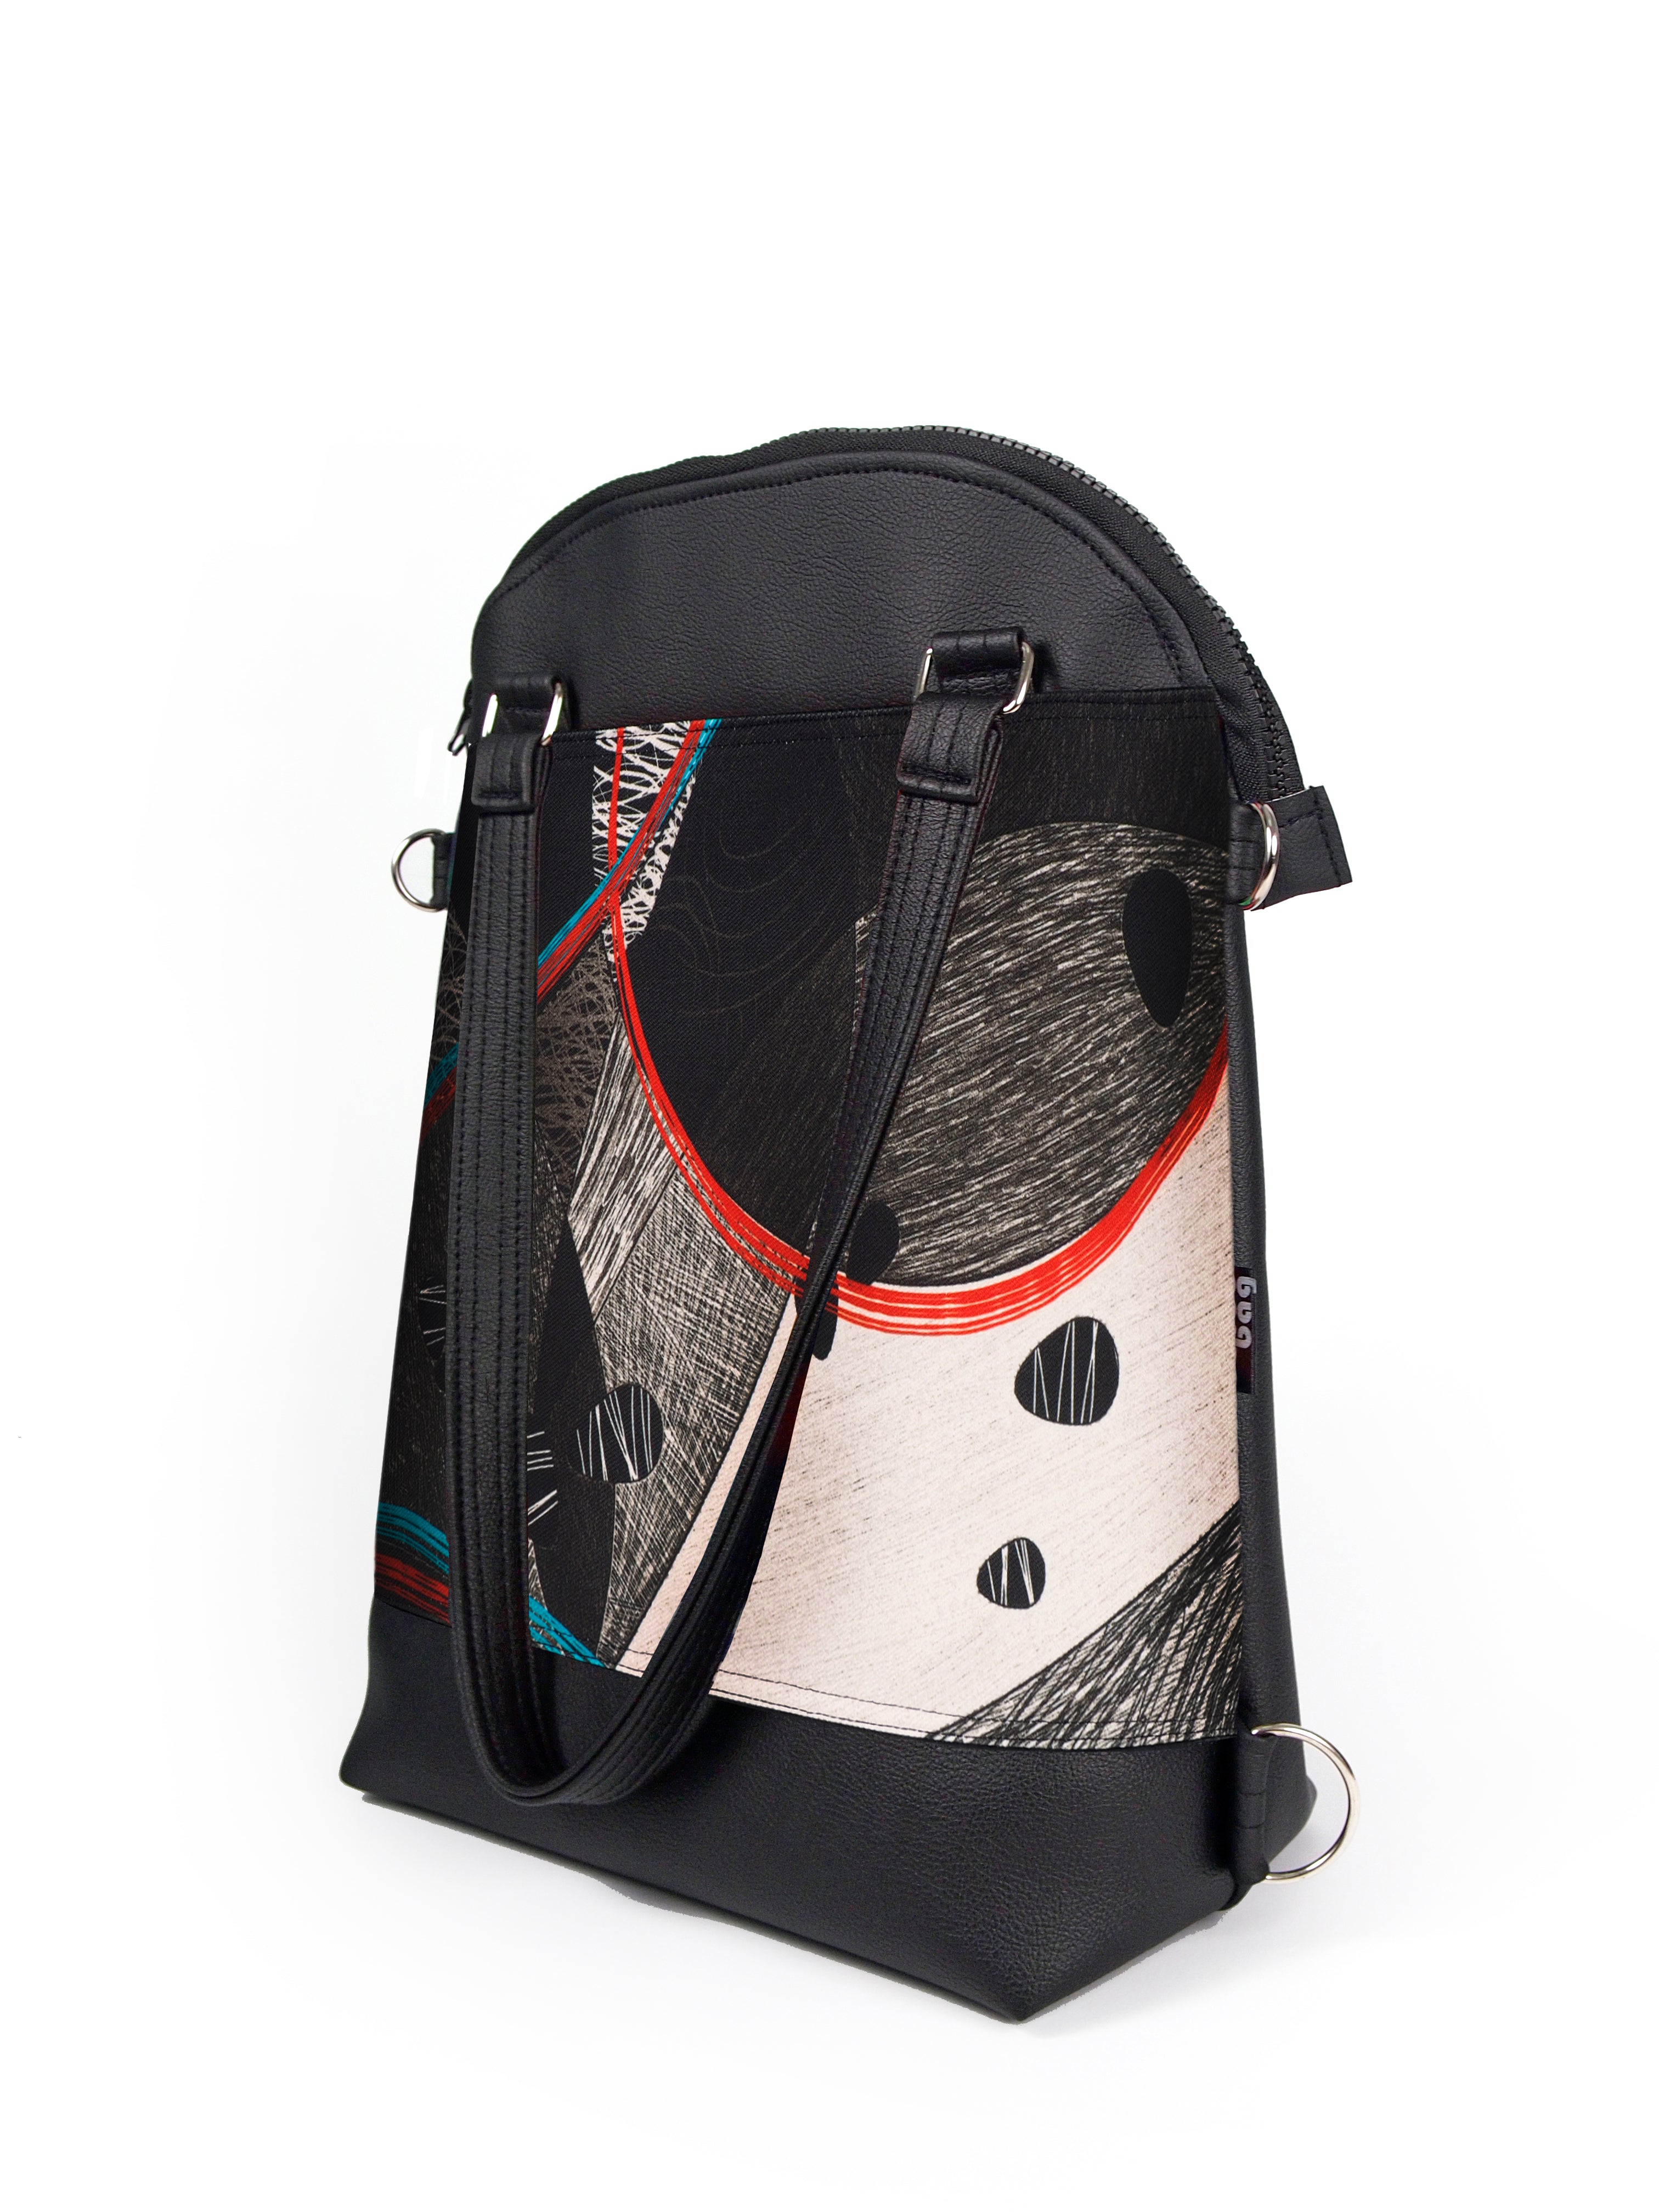 Bardo classic bag and backpack - Dance - Premium  from BARDO ART WORKS - Just lv89.00! Shop now at BARDO ART WORKS